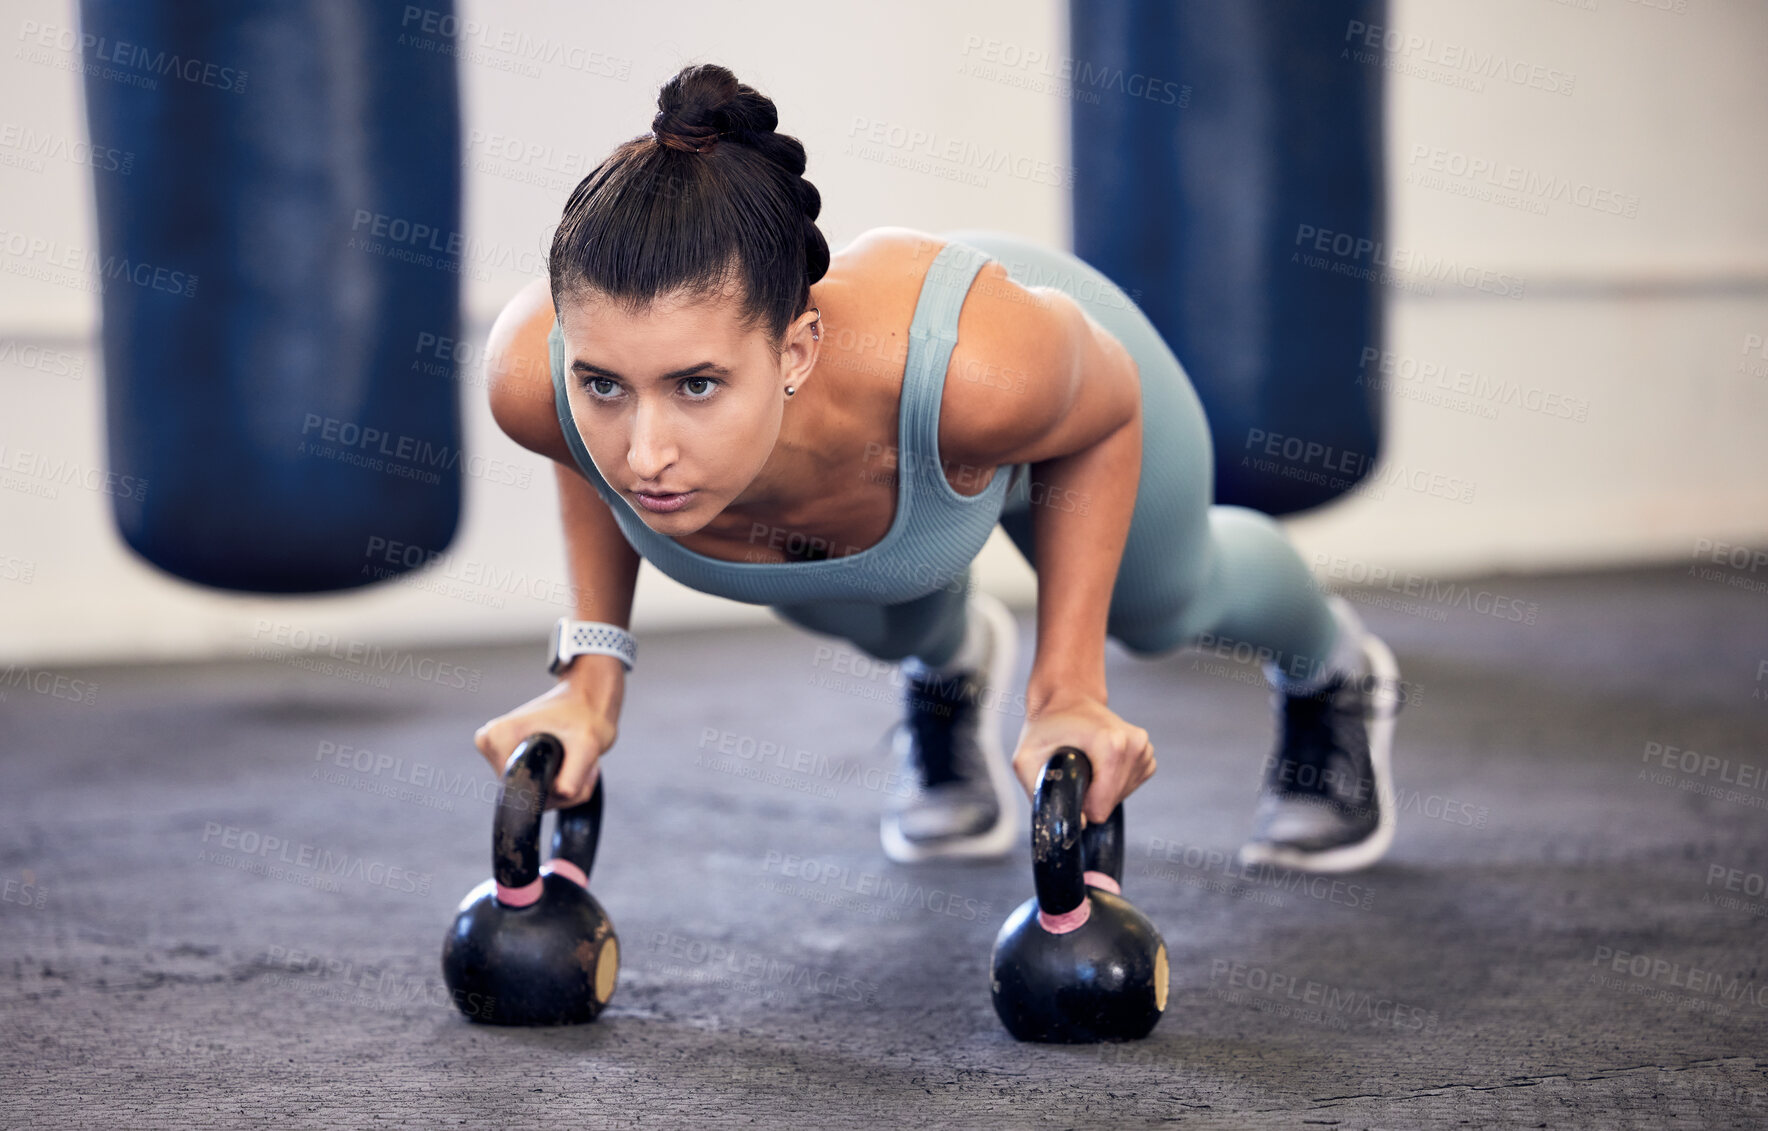 Buy stock photo Exercise, kettlebell plank and woman focus on fitness, body transformation goals or health wellness. Workout motivation, sports challenge determination and athlete training on boxing gym floor